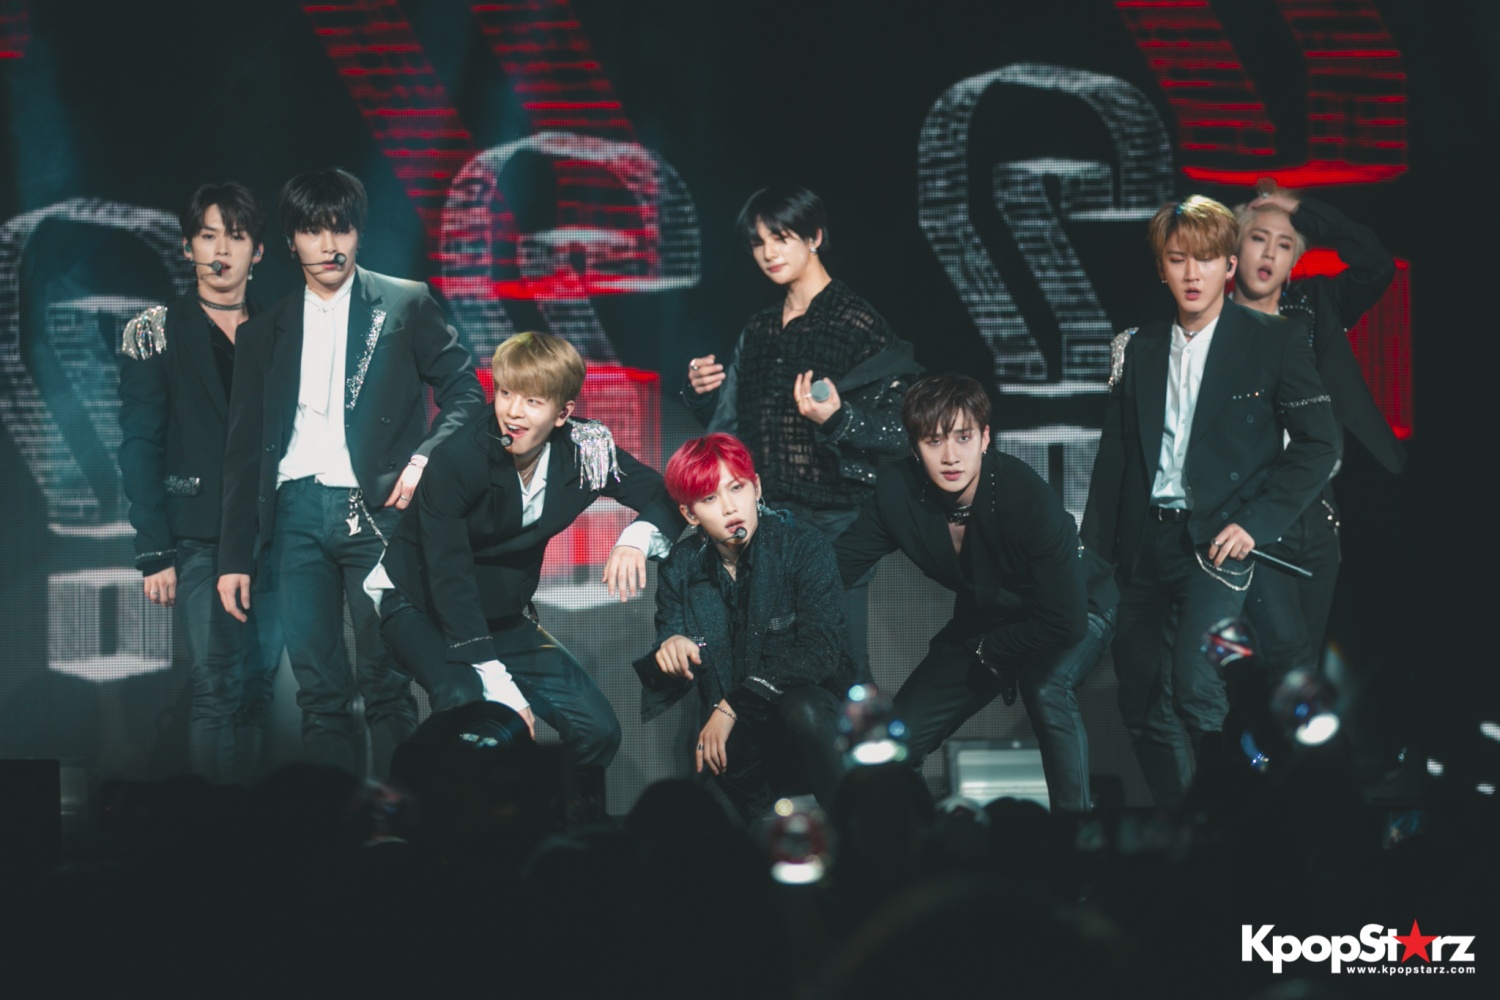 Stray Kids World Tour "District 9 Unlock" EXCLUSIVE PHOTOS In NYC